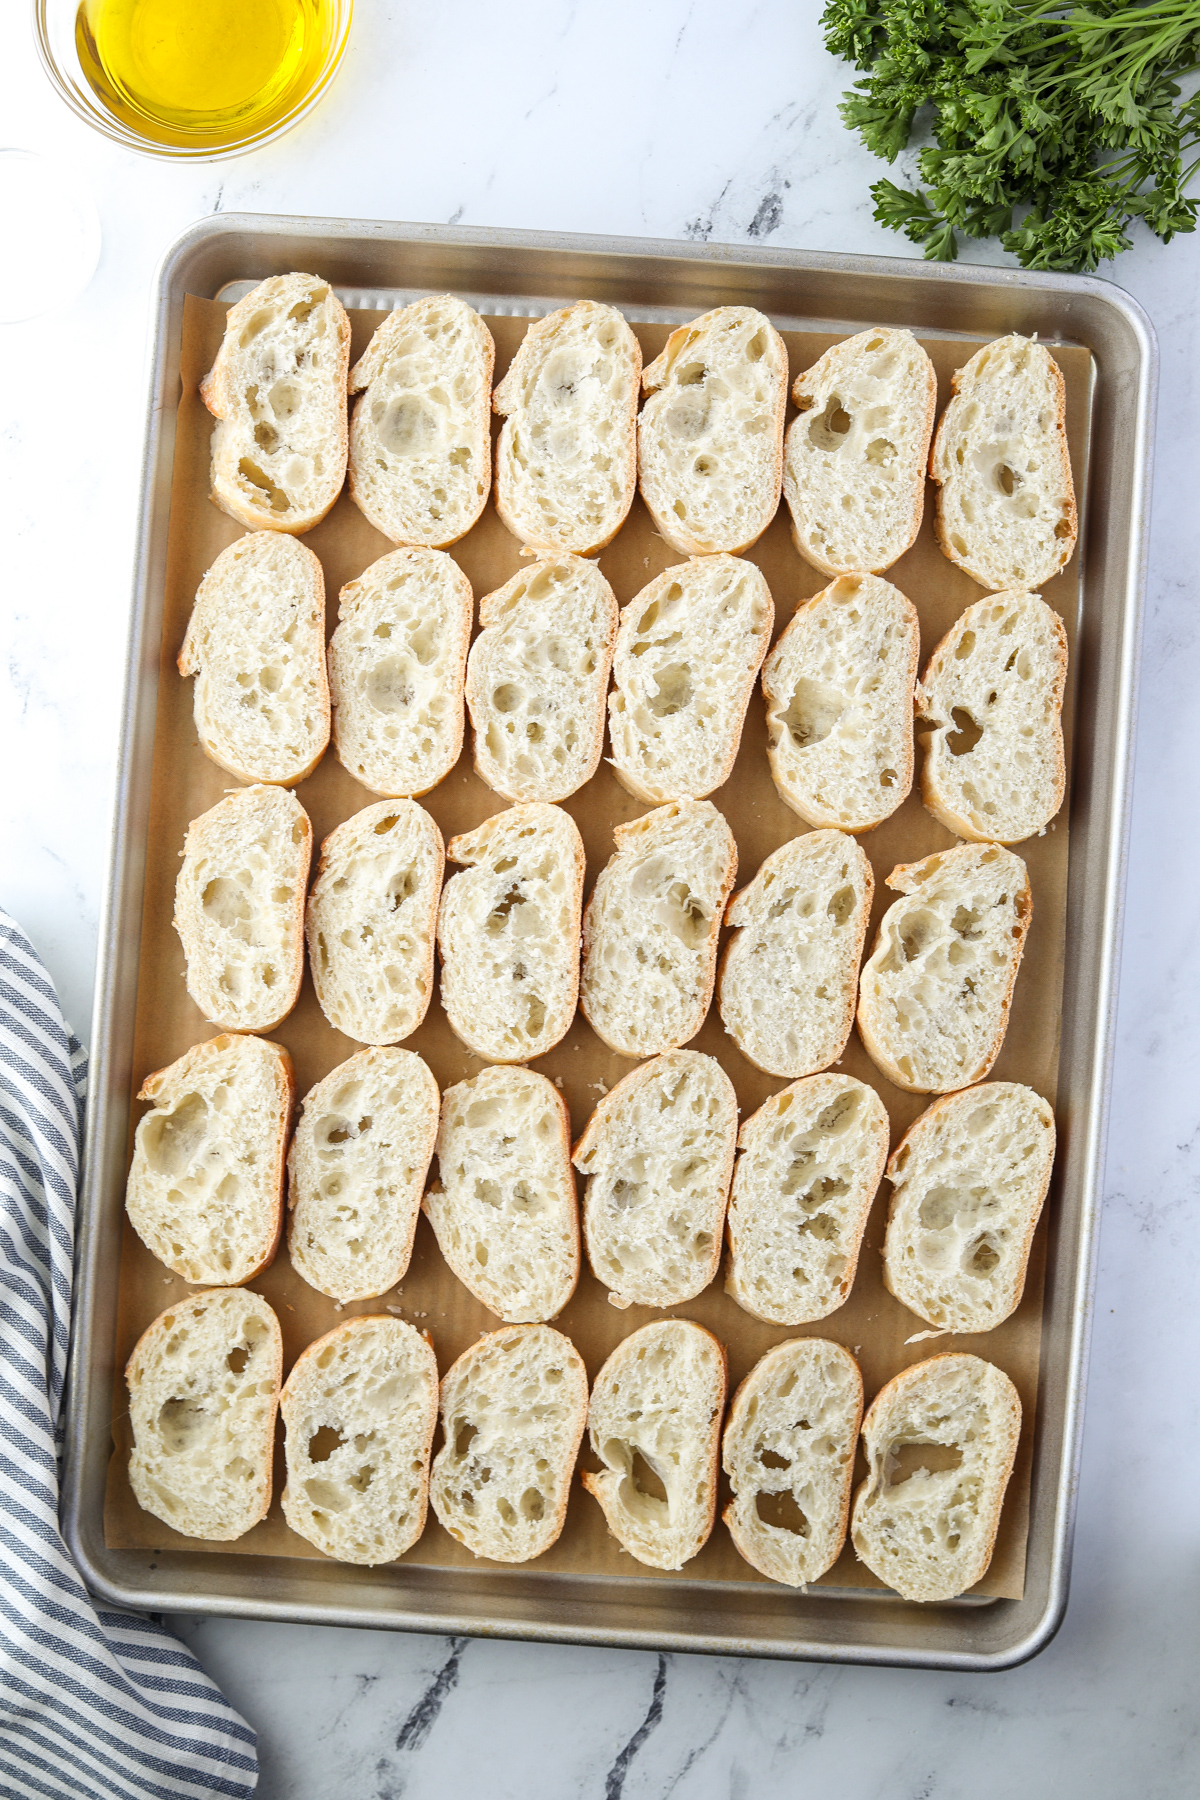 A baking sheet with slices of baguette lined up.